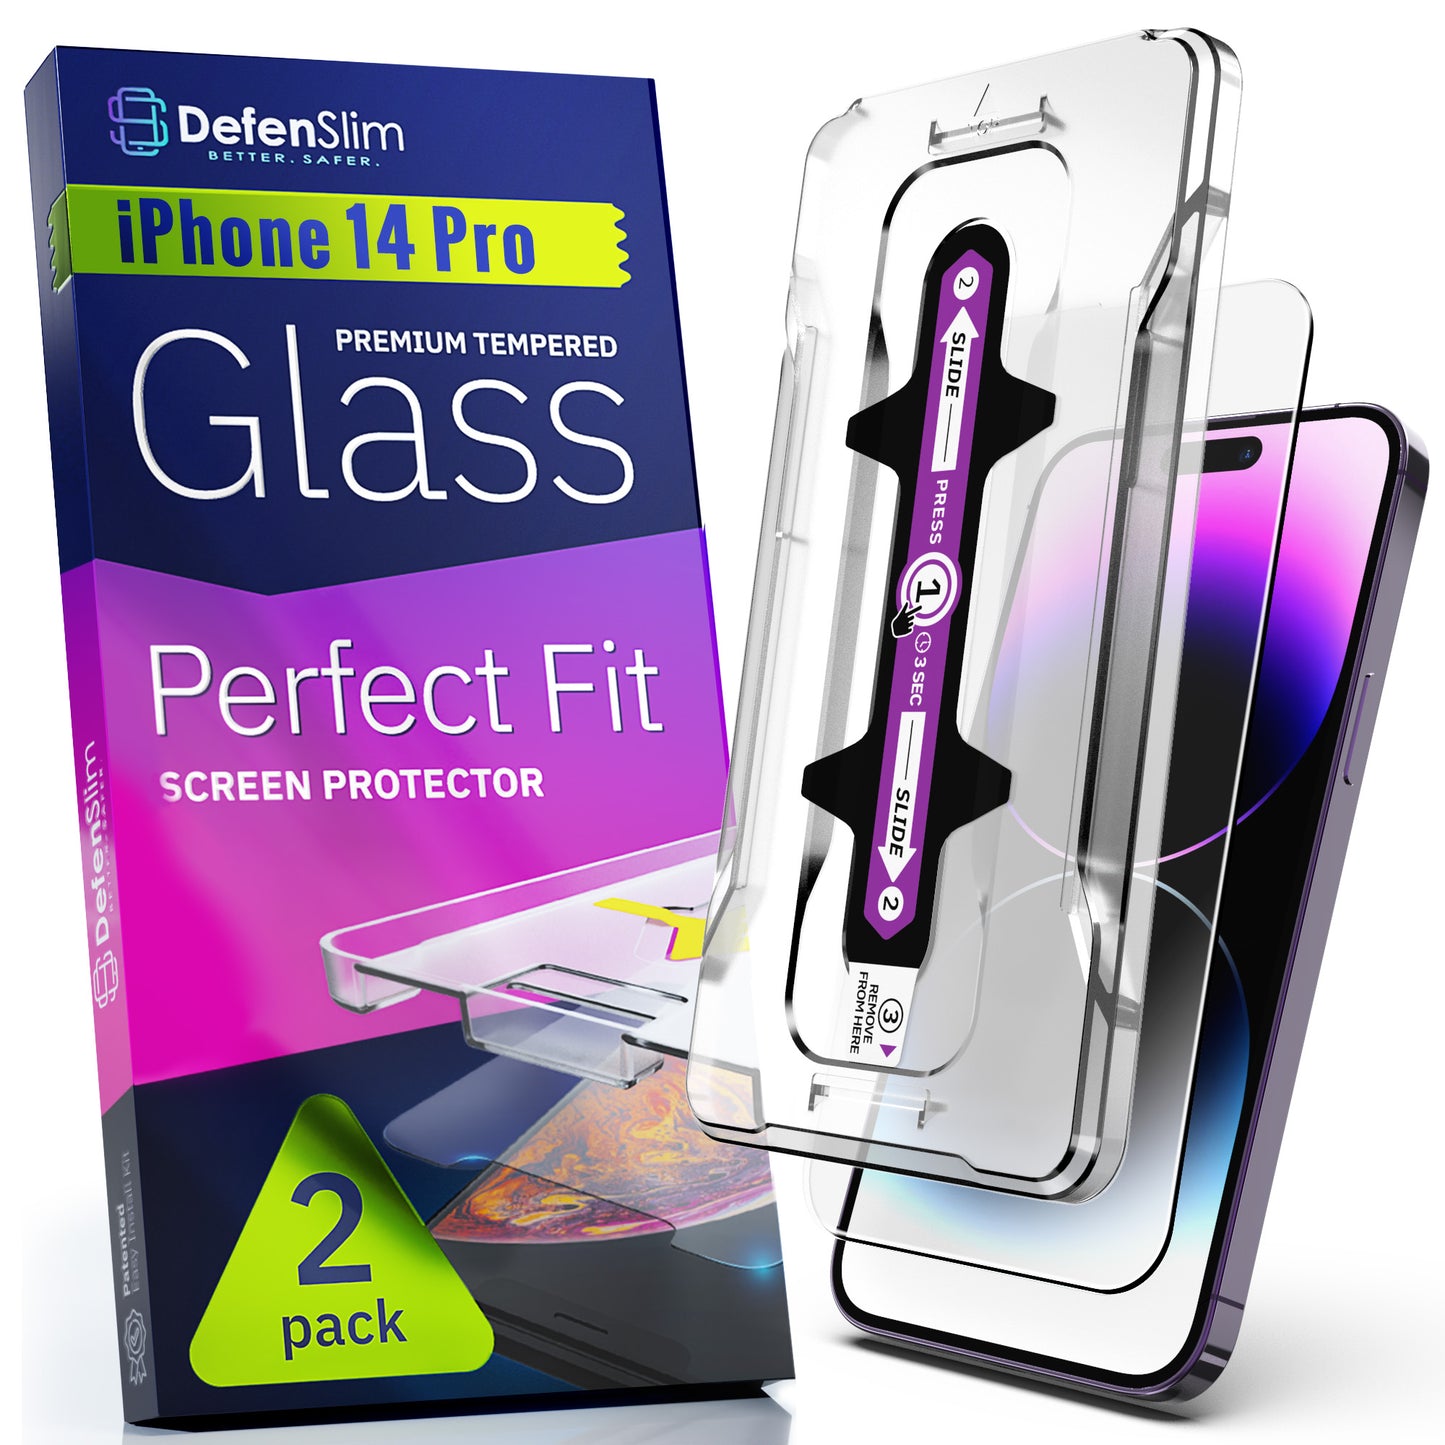 Defenslim iPhone 14 Pro Screen Protector [2-Pack] with Easy Auto-Align Install Kit